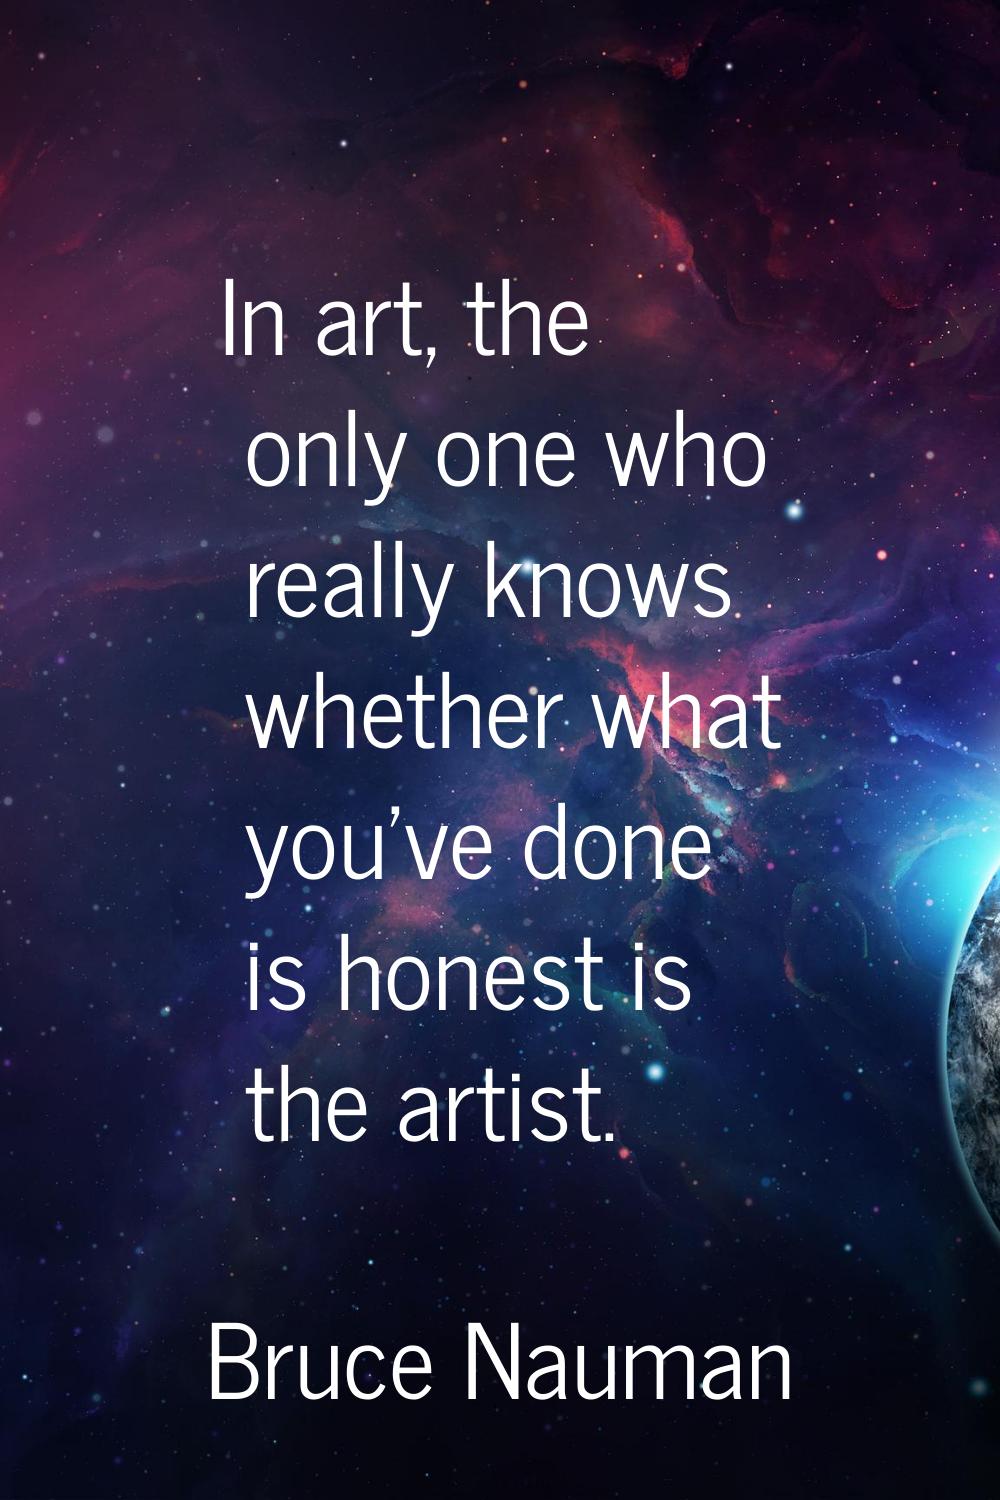 In art, the only one who really knows whether what you've done is honest is the artist.